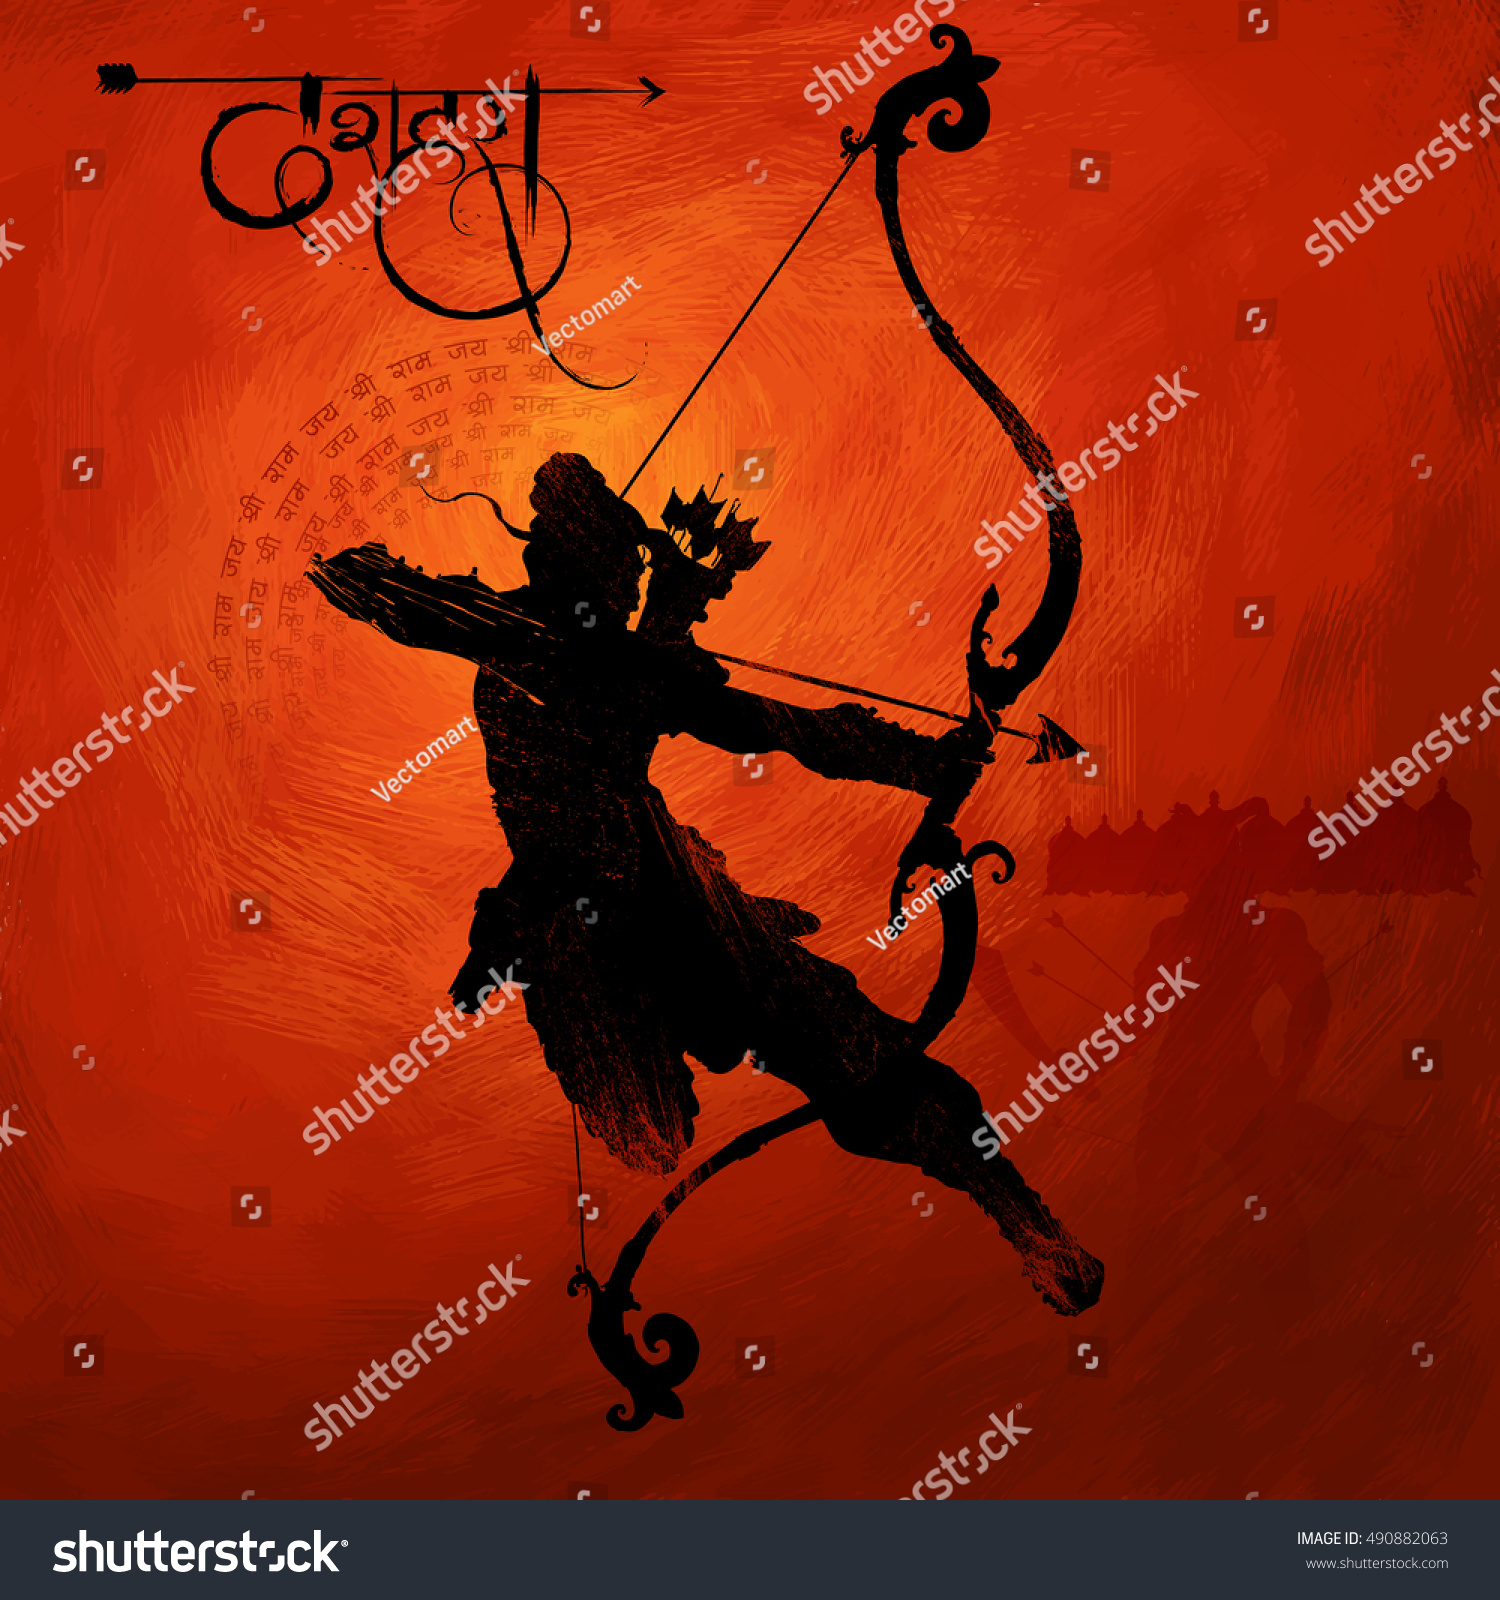 illustration of Lord Rama with arrow killing Ravana in Navratri festival of India poster with hindi text meaning Dussehra #490882063